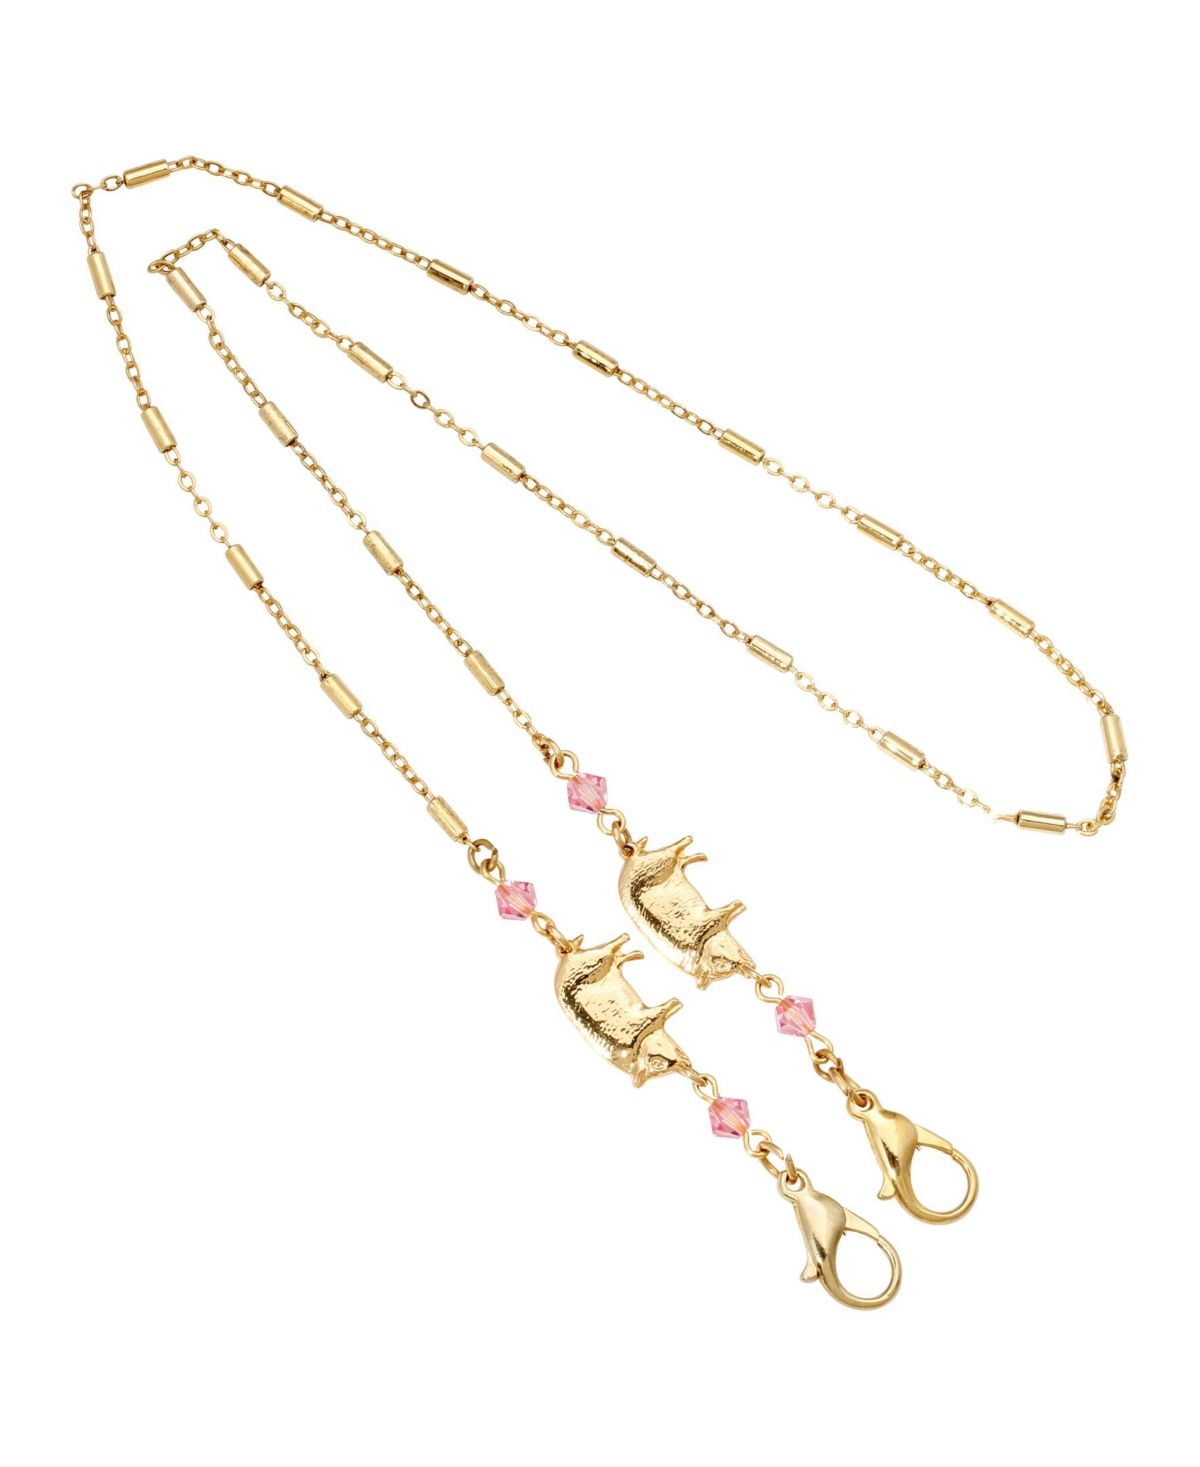 2028 Gold-tone Beaded Face Mask Chain Holder In Pink